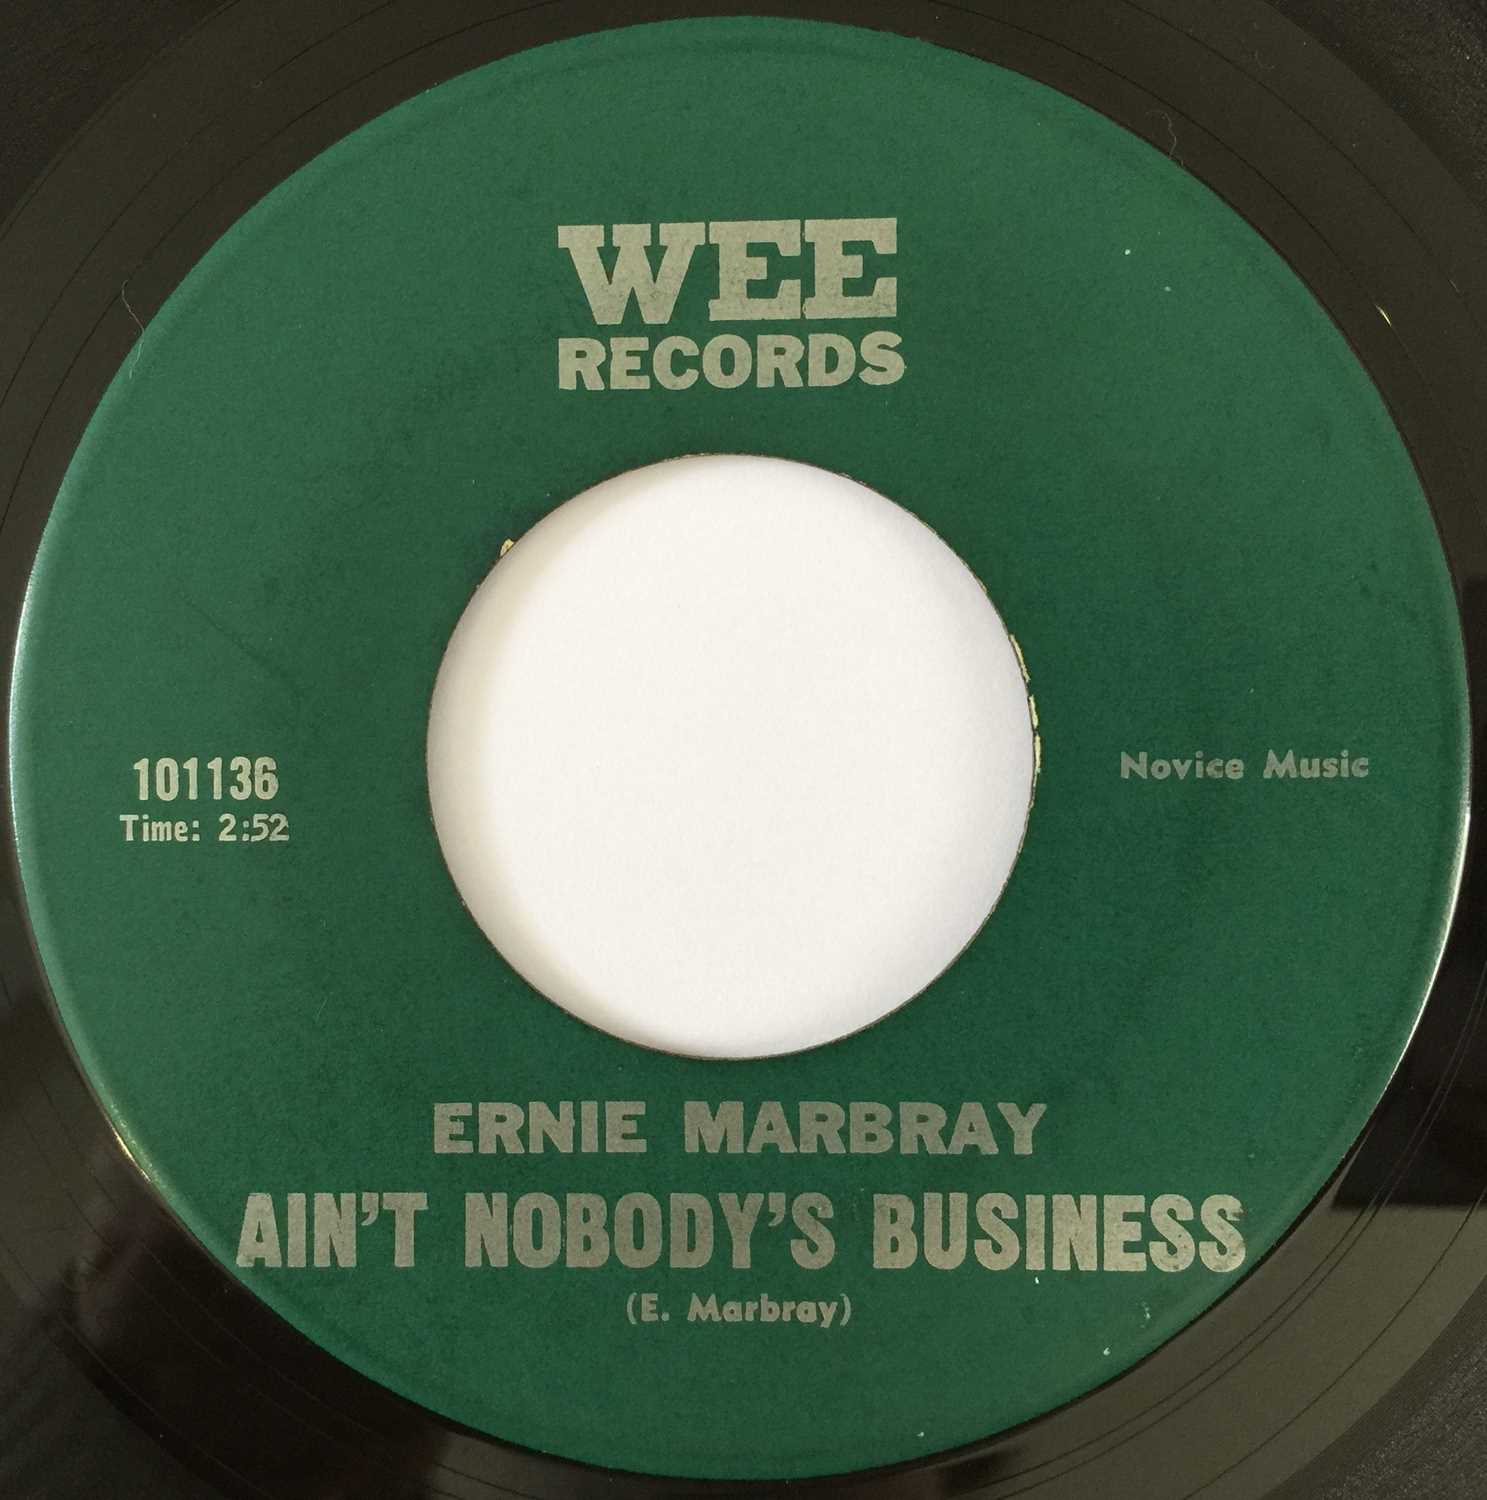 Lot 16 - ERNIE MARBRAY - AIN'T NOBODY'S BUSINESS/ THE STAKES ARE TOO HIGH 7" (US SOUL - WEE RECORDS 101136)